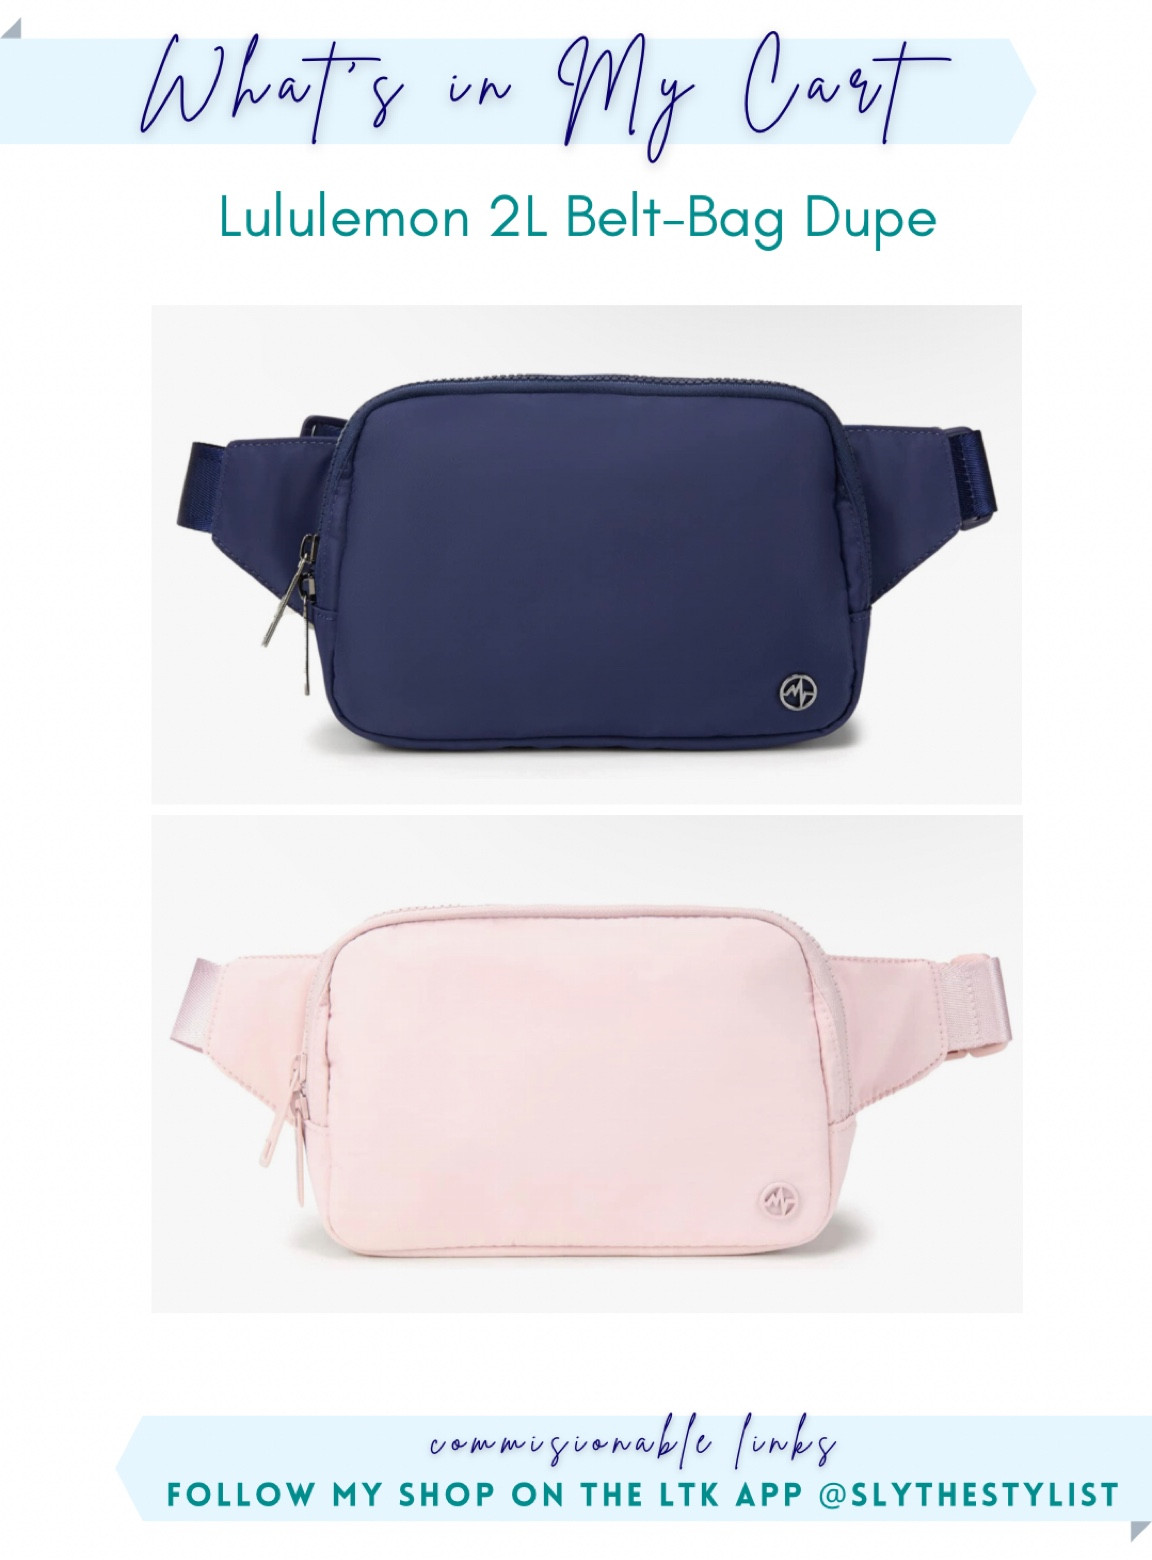 Everywhere Belt Bag Large 2L, … curated on LTK